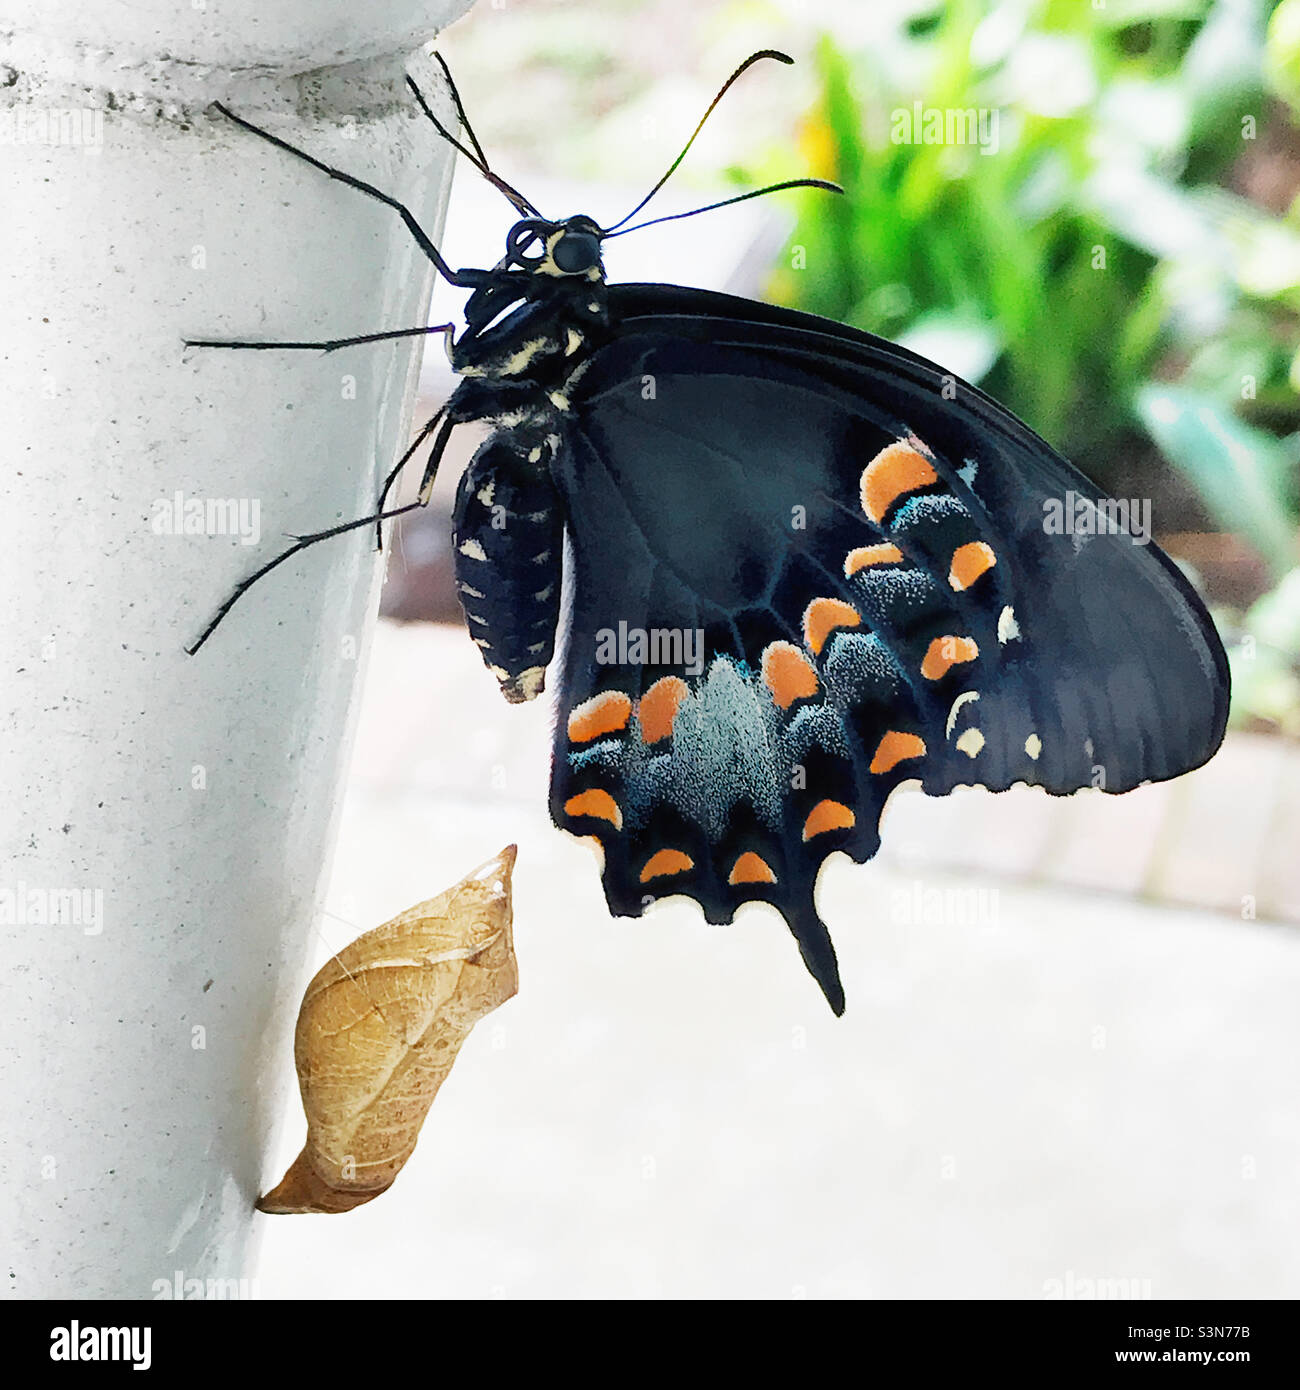 Newly emerged spicebush swallowtail butterfly from its chrysalis that is attached to a porch rocking chair. Stock Photo